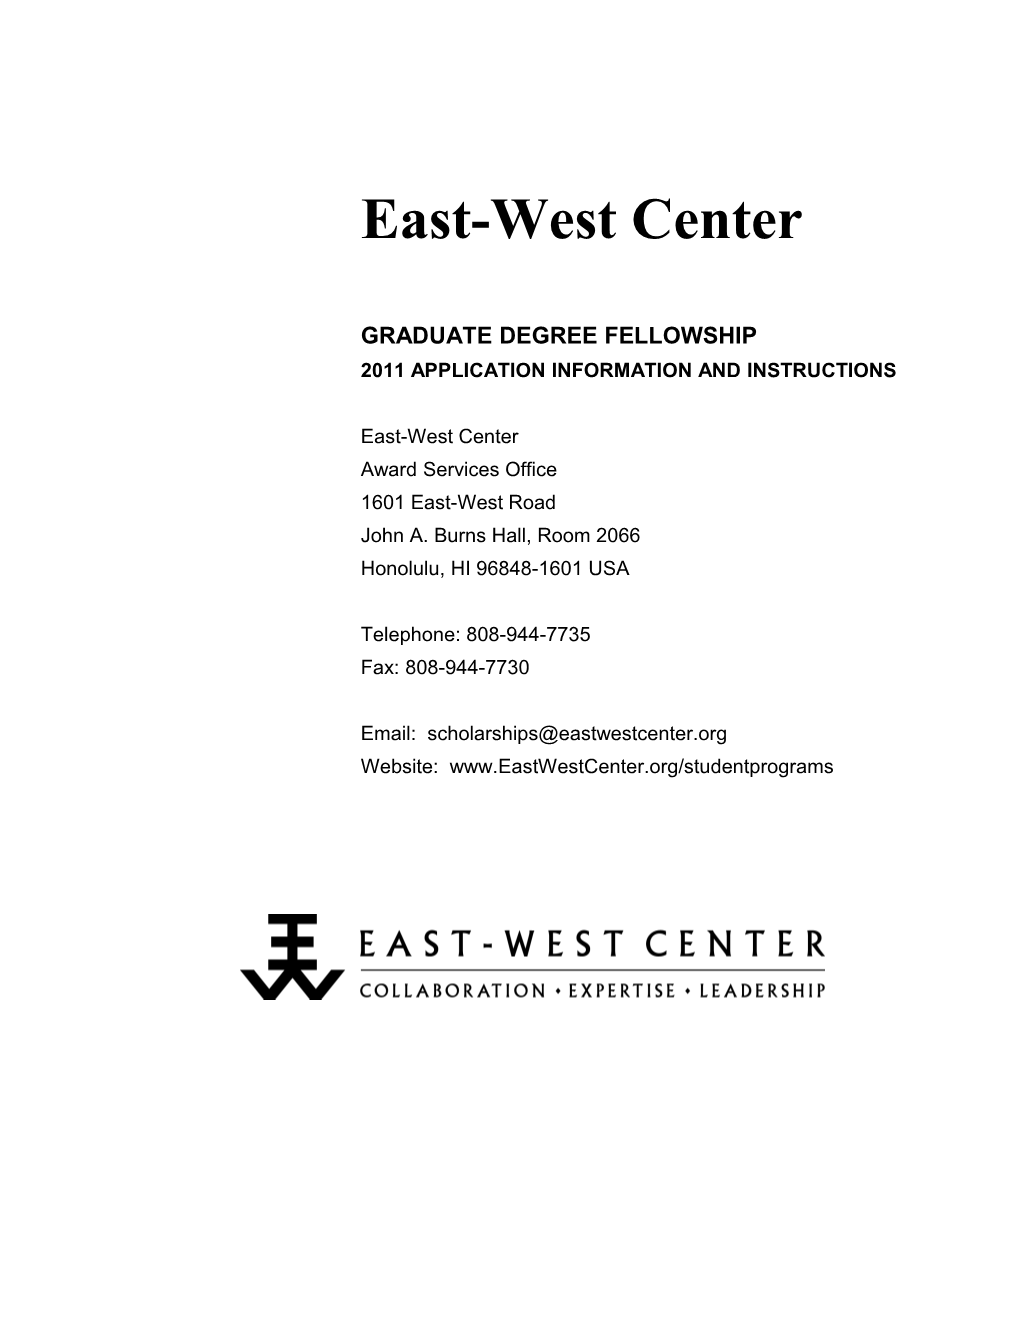 The East-West Center